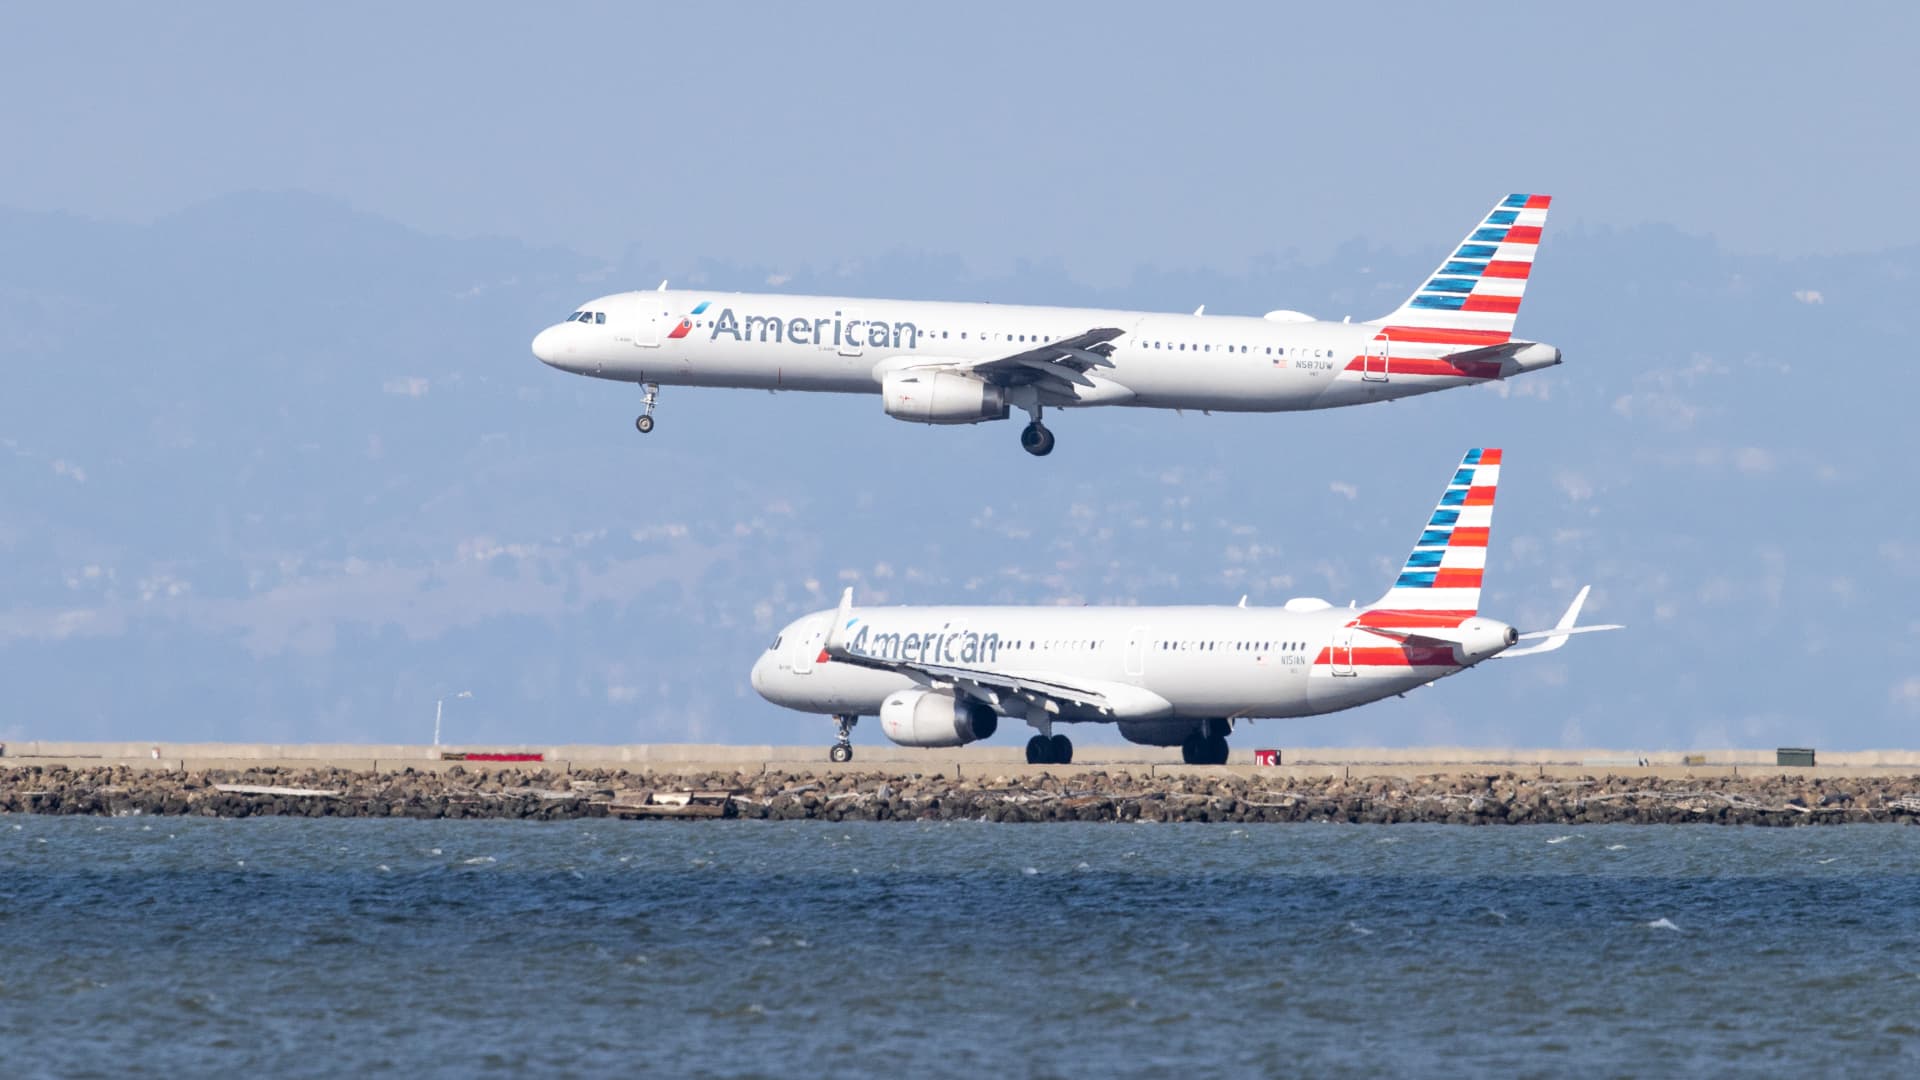 American Airways scraps conventional frequent flyer award chart in dynamic pricing shift